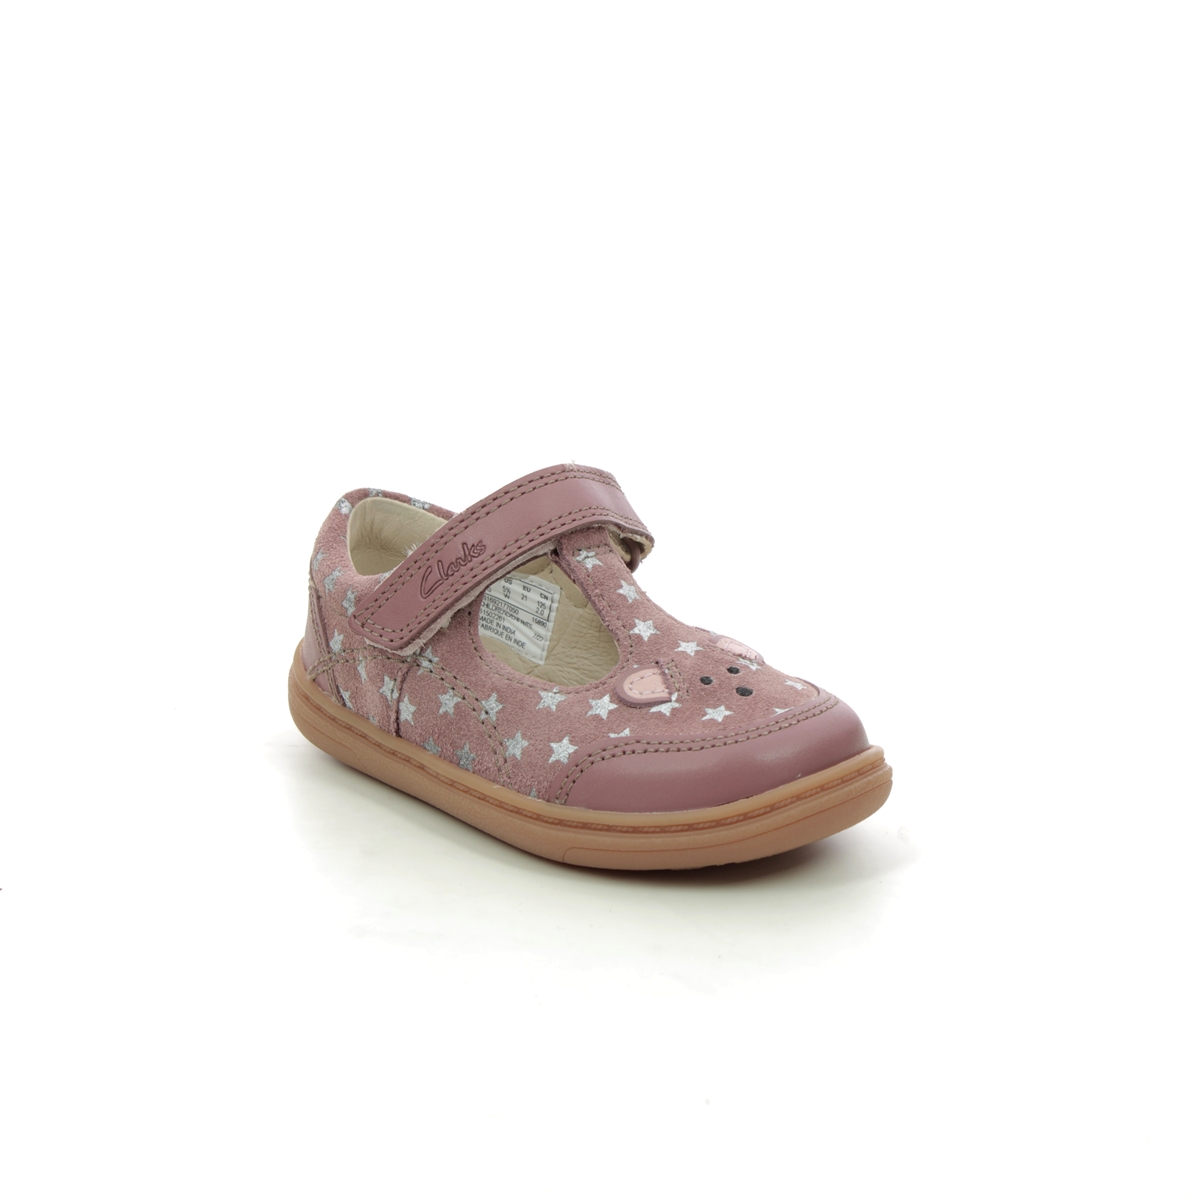 Clarks Flash Mouse T Pink Suede Kids First And Toddler 692177G In Size 5 In Plain Pink Suede G Width Fitting For kids